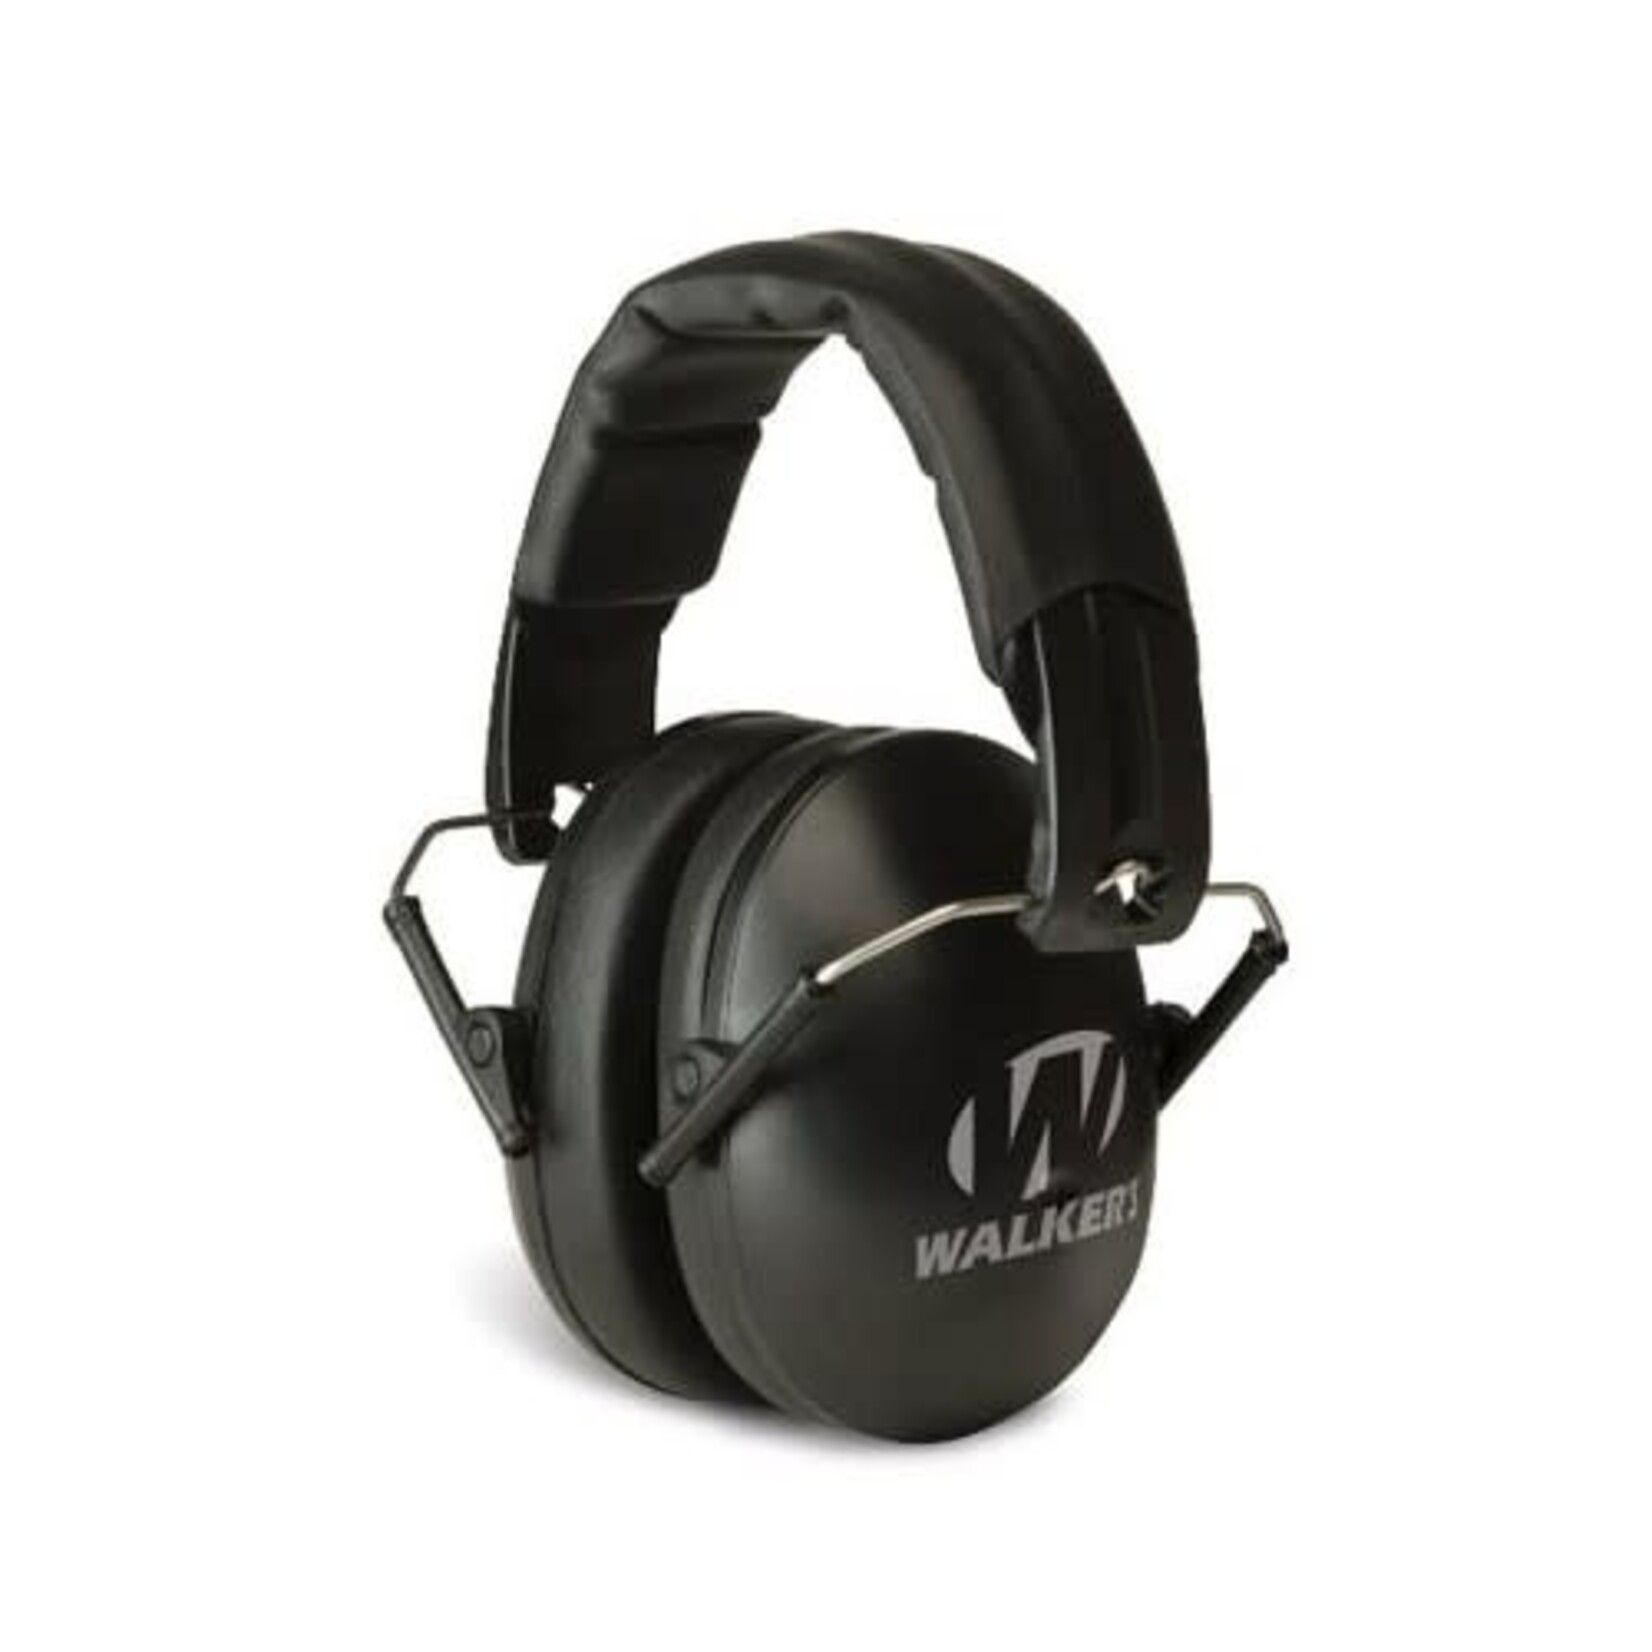 Walkers Walkers Youth and Women's Passiv Folding Muffs Black